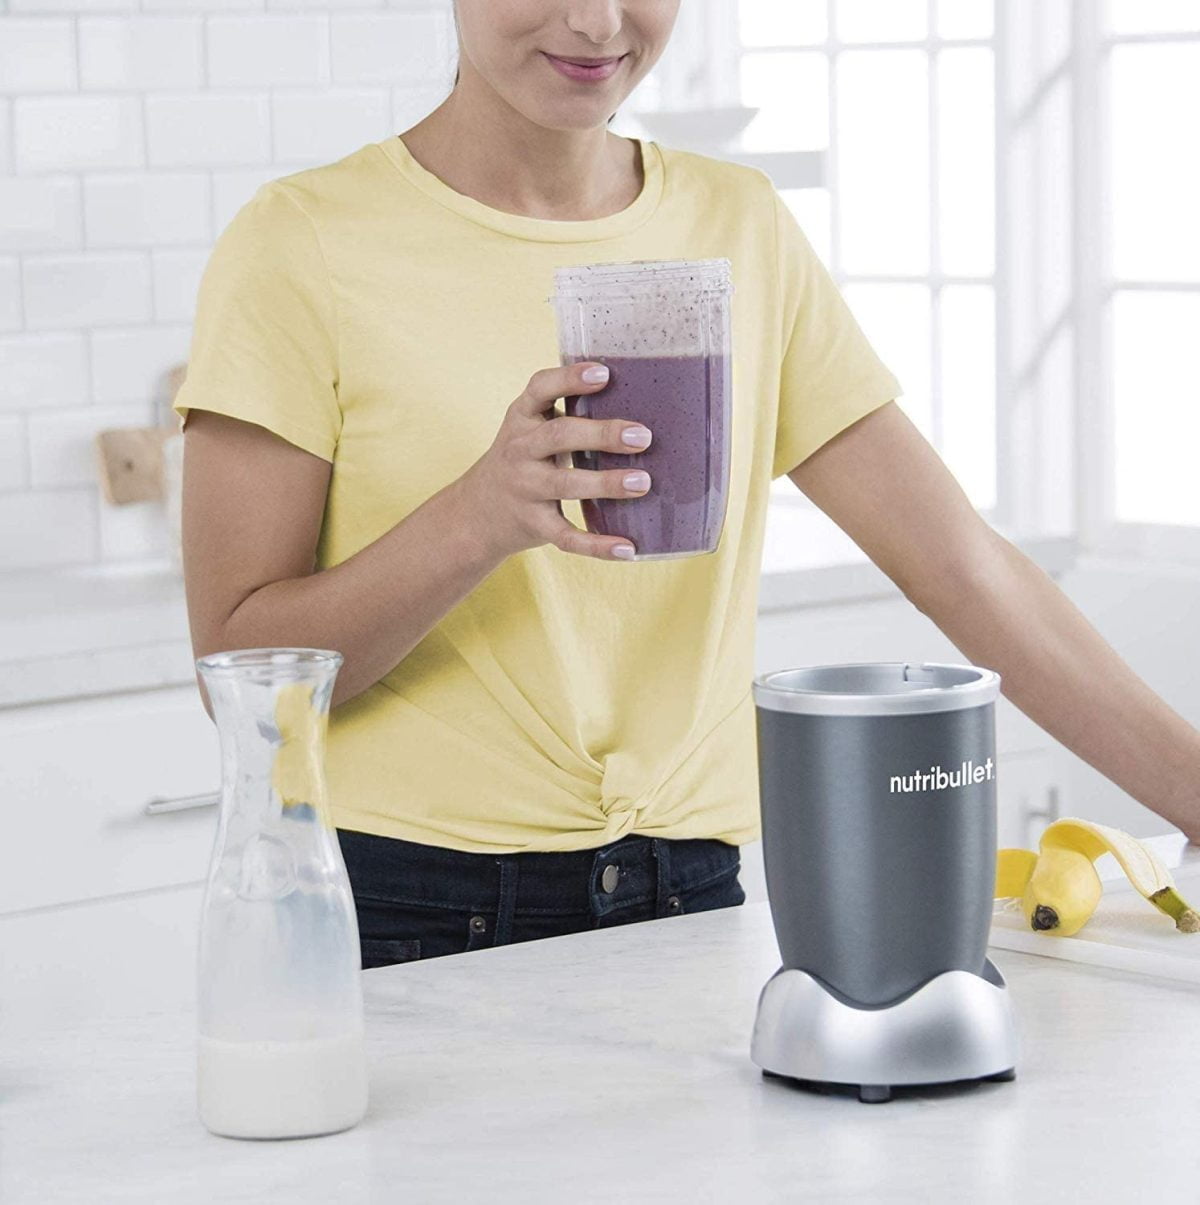 615Ytsjqm8L. Ac Sl1500 &Lt;Ul Class=&Quot;A-Unordered-List A-Vertical A-Spacing-Mini&Quot;&Gt; &Lt;Li&Gt;&Lt;Span Class=&Quot;A-List-Item&Quot;&Gt;Meet The Most Popular Nutribullet, Our Compact-Yet-Powerful Personal Blender. You Choose What Goes In To Get The Most Out Of Every Ingredient, Every Day.&Lt;/Span&Gt;&Lt;/Li&Gt; &Lt;Li&Gt;&Lt;Span Class=&Quot;A-List-Item&Quot;&Gt;The Nutribullet Is The Fastest, Easiest Solution For Making Nutrient-Packed Smoothies. Load It Up With Your Favorite Whole Foods Like Nuts, Berries, And Spinach, Then Push, Twist, And Blend Your Way To A Healthier Lifestyle.&Lt;/Span&Gt;&Lt;/Li&Gt; &Lt;Li&Gt;&Lt;Span Class=&Quot;A-List-Item&Quot;&Gt;Powerful 600-Watt Motor And Refined Nutrient-Extraction Blades Blend Whole Foods Into Liquid Fuel For Your Body - In Seconds.&Lt;/Span&Gt;&Lt;/Li&Gt; &Lt;Li&Gt;&Lt;Span Class=&Quot;A-List-Item&Quot;&Gt;Hassle-Free Cleaning - Simply Twist Off The Blade, Rinse With Soap And Water, And Put The Cups In The Top Rack Of The Dishwasher.&Lt;/Span&Gt;&Lt;/Li&Gt; &Lt;Li&Gt;&Lt;Span Class=&Quot;A-List-Item&Quot;&Gt;What You Get: (1) 600 Watt Motor Base, (1) Extractor Blade, (1) 700Ml Cup, (1) 500Ml Cup, (1) Lip Ring With Handle, (1) Solid Lid, (1) User Guide, (1) Recipe Book. 2 Years Brand Warranty&Lt;/Span&Gt;&Lt;/Li&Gt; &Lt;/Ul&Gt; Nutribullet Nutribullet 600 Watts, 8 Piece Set, Multi-Function High Speed Blender, Mixer System With Nutrient Extractor, Smoothie Maker, Gray